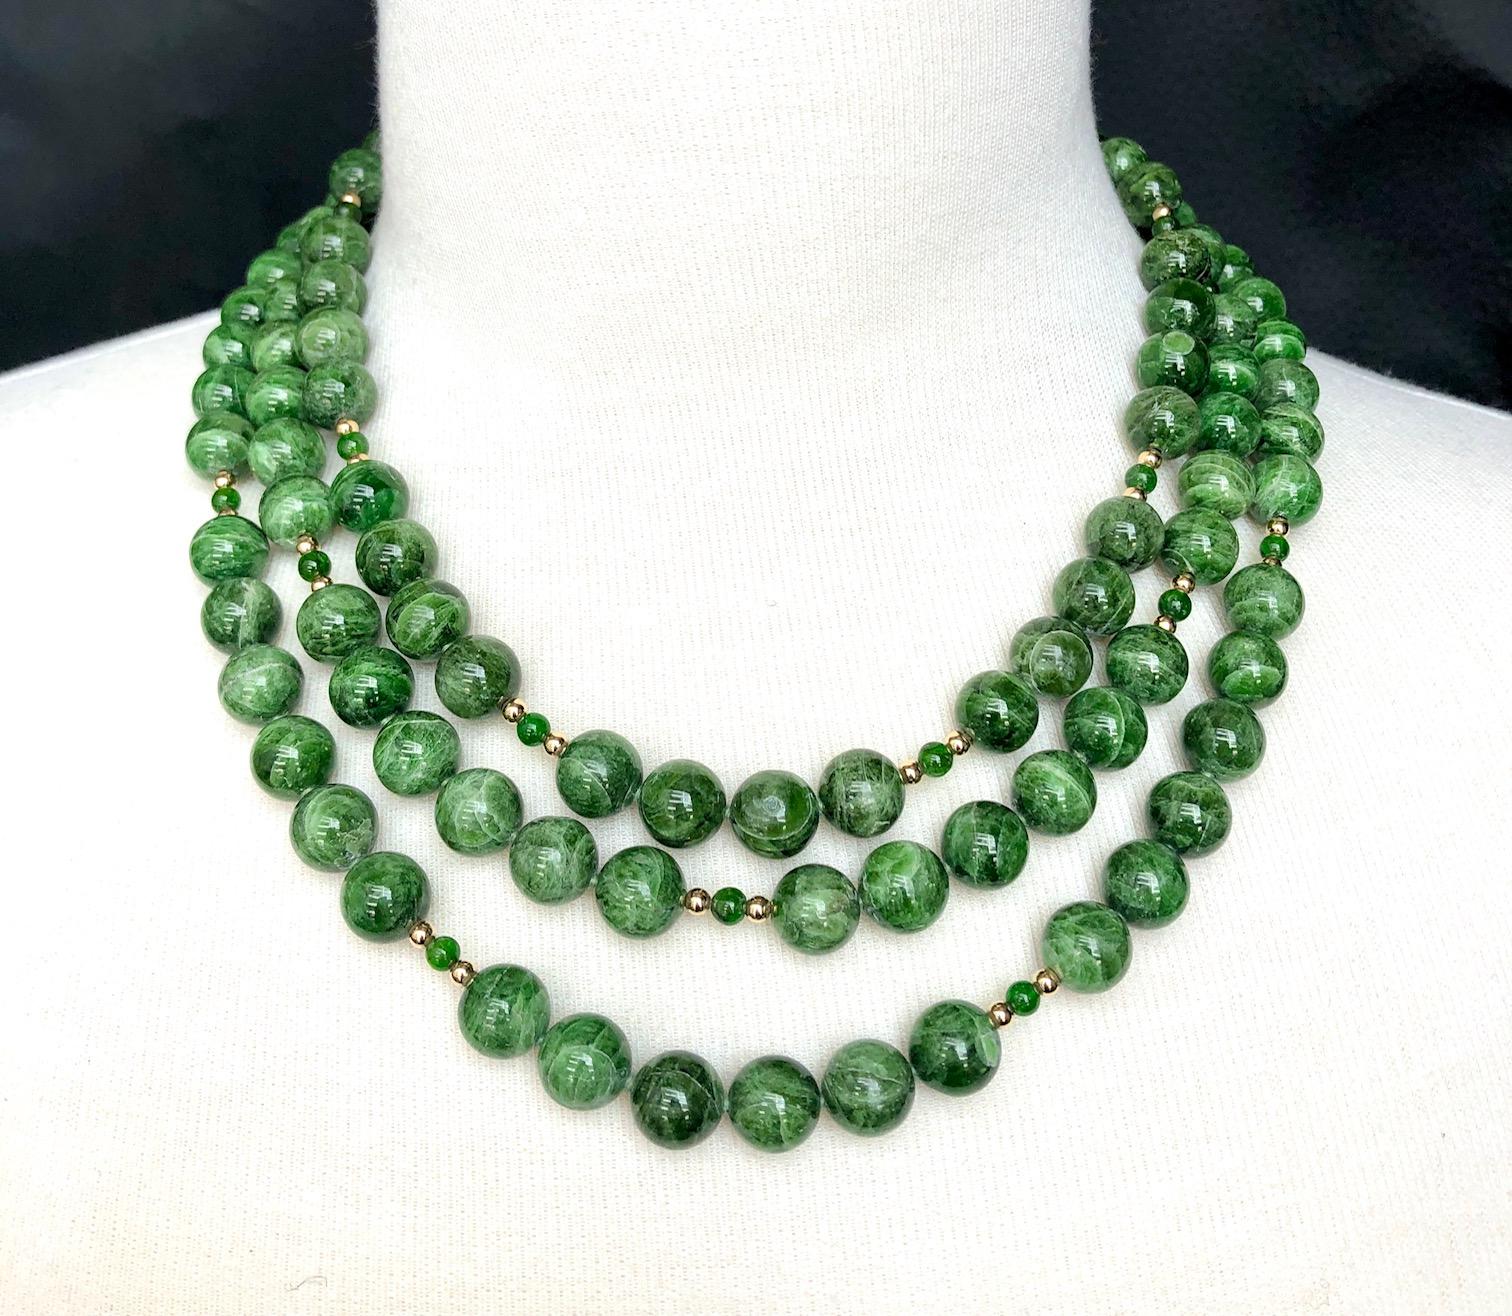 10mm Variegated Chrome Diopside Beaded Necklace with Yellow Gold Accents For Sale 2